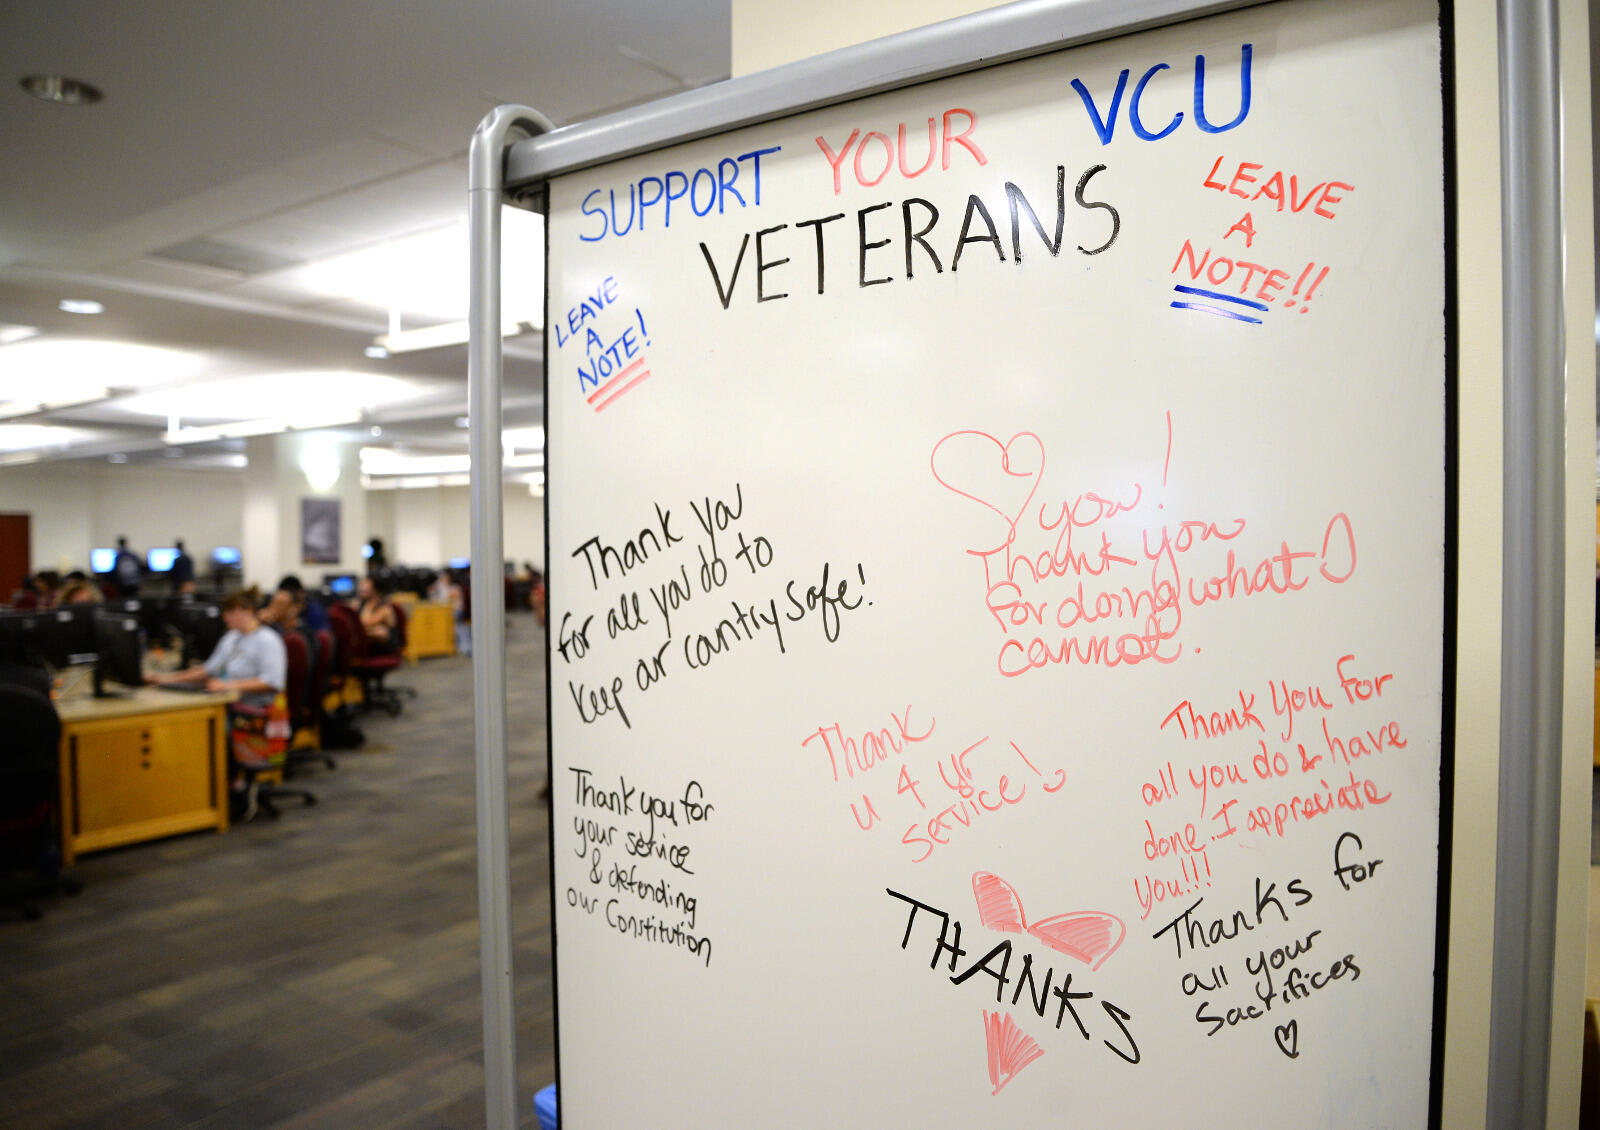 A whiteboard nearby invites VCU community members to write notes of thanks to veterans.